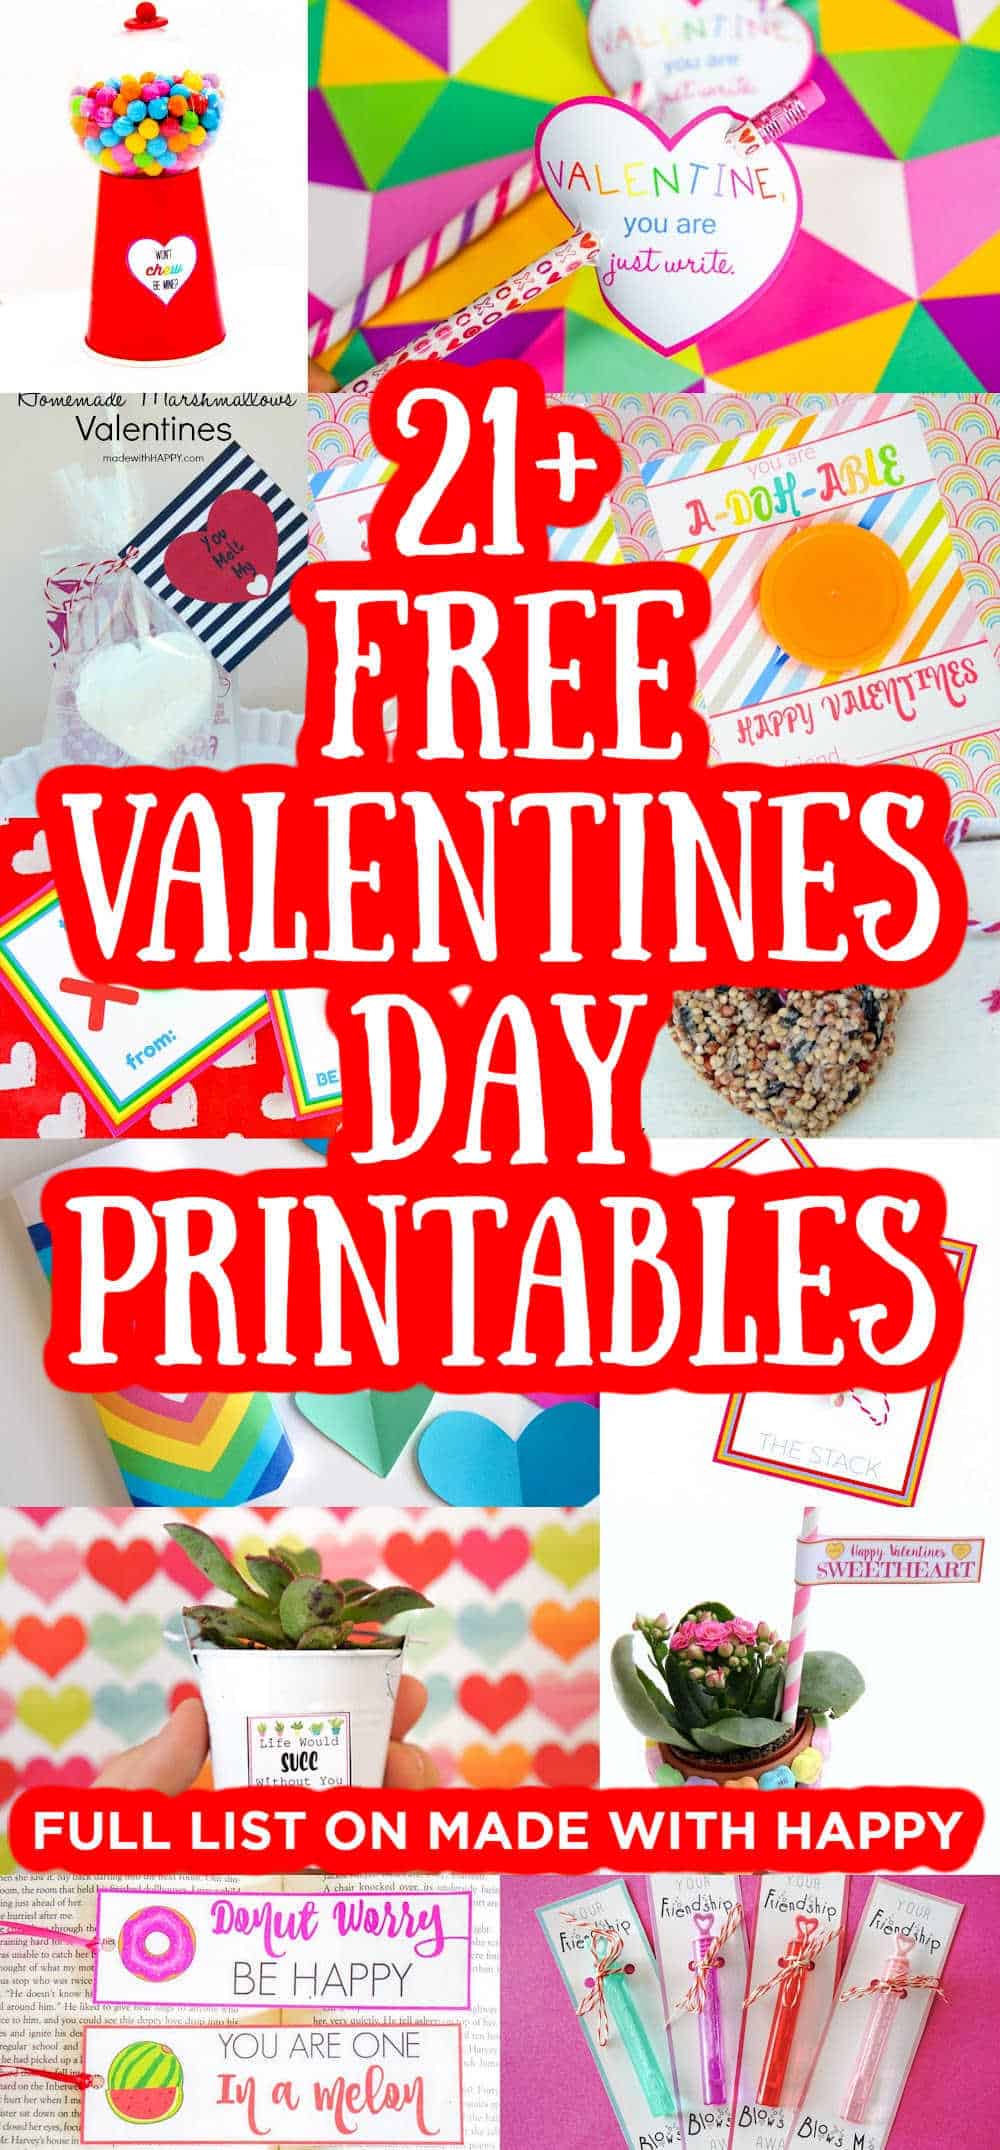 free-valentine-s-day-printables-for-kids-made-with-happy